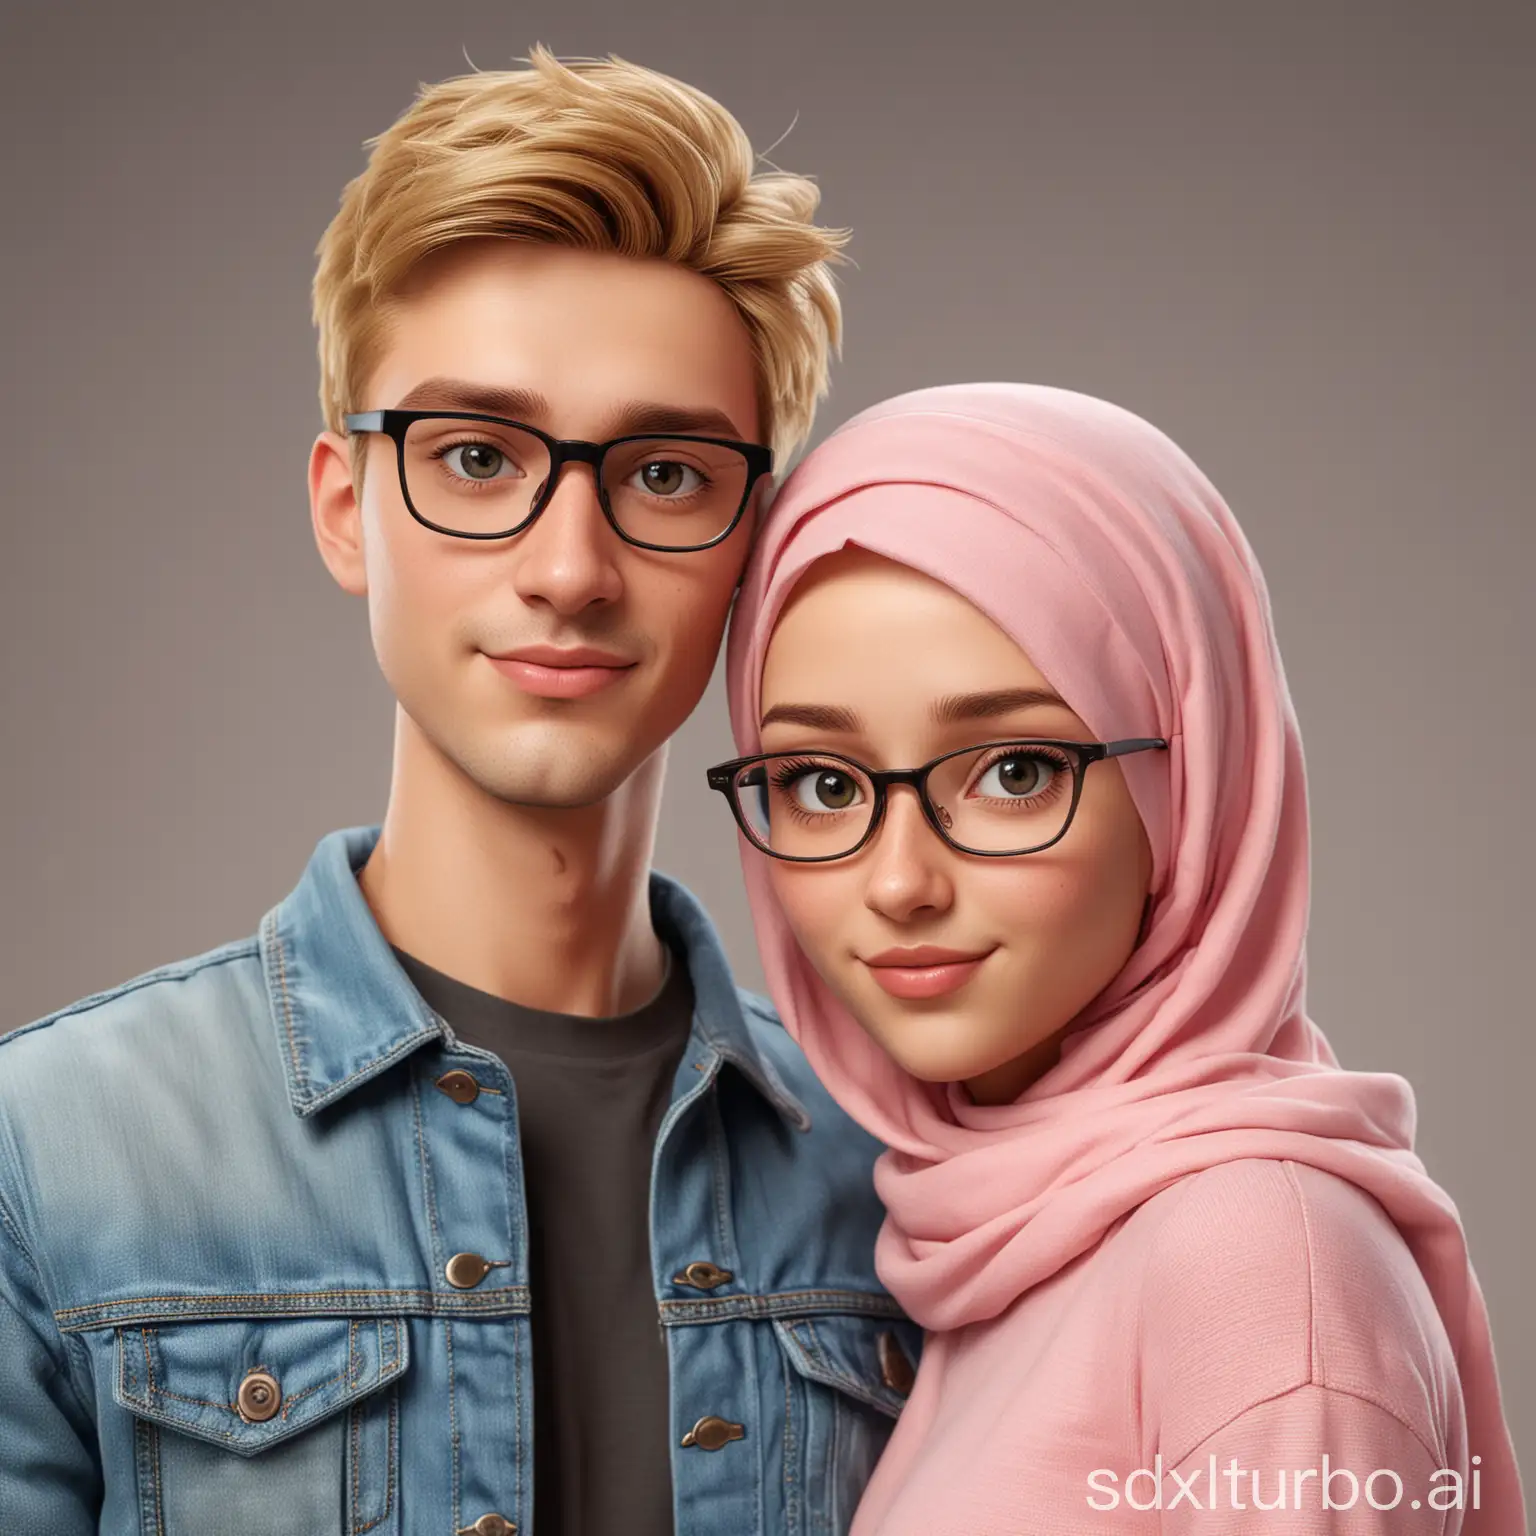 Young-Couple-in-Denim-Jacket-and-Hijab-Taking-Selfie-Together